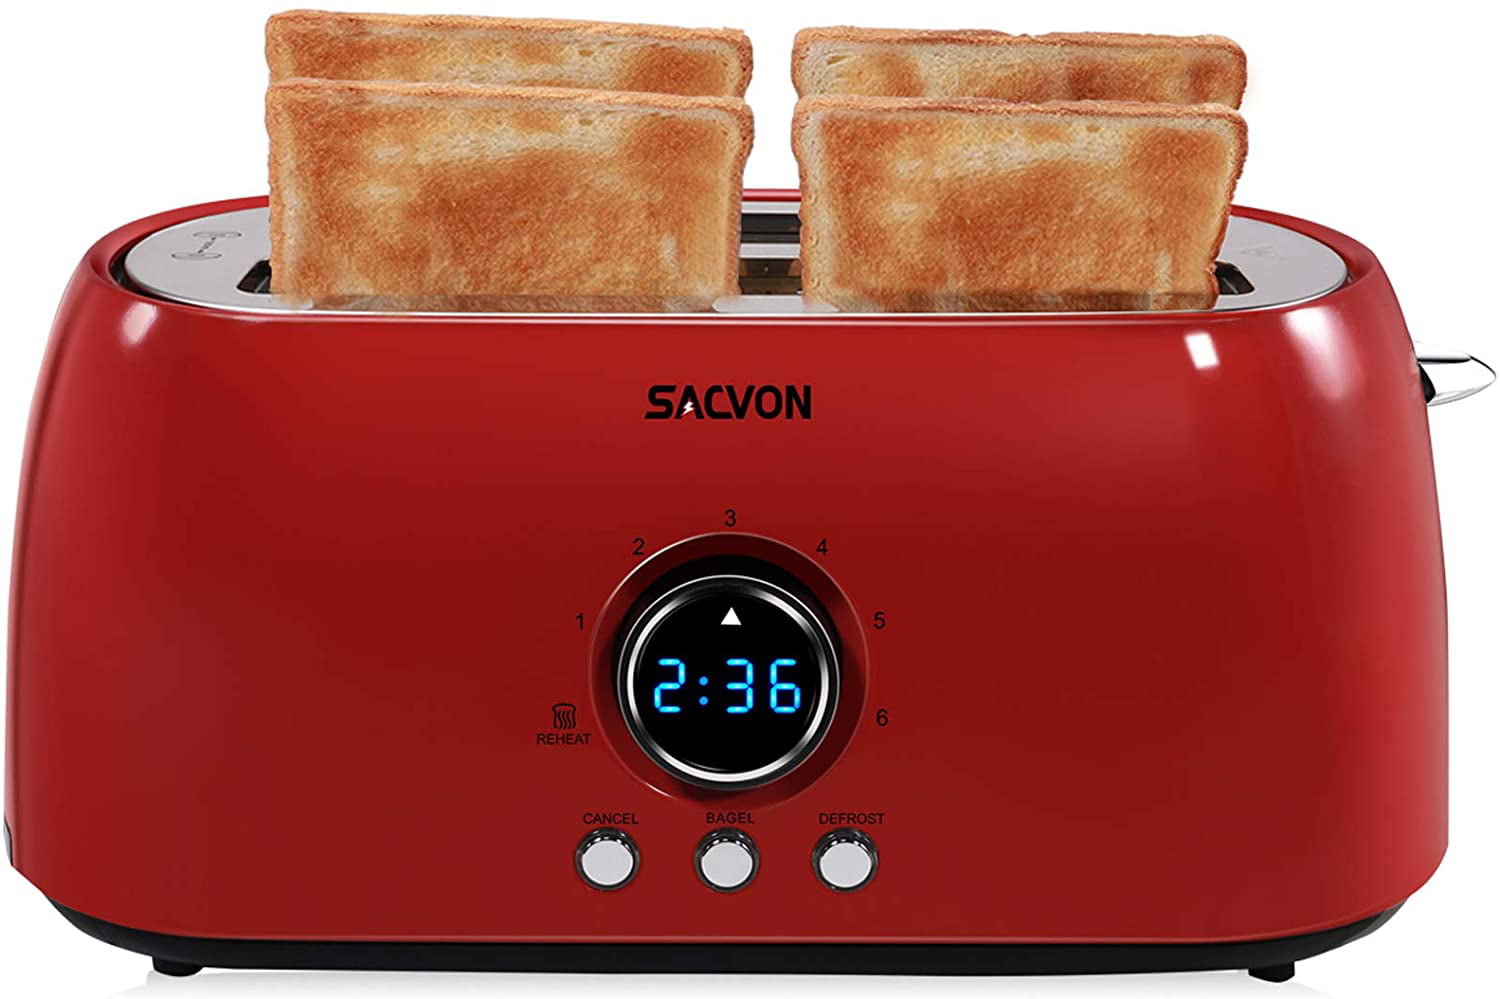 Toaster 4 Slice Long Slot, Stainless Steel Toasters with Big Timer, Crumbs Tray, Red - Walmart.com